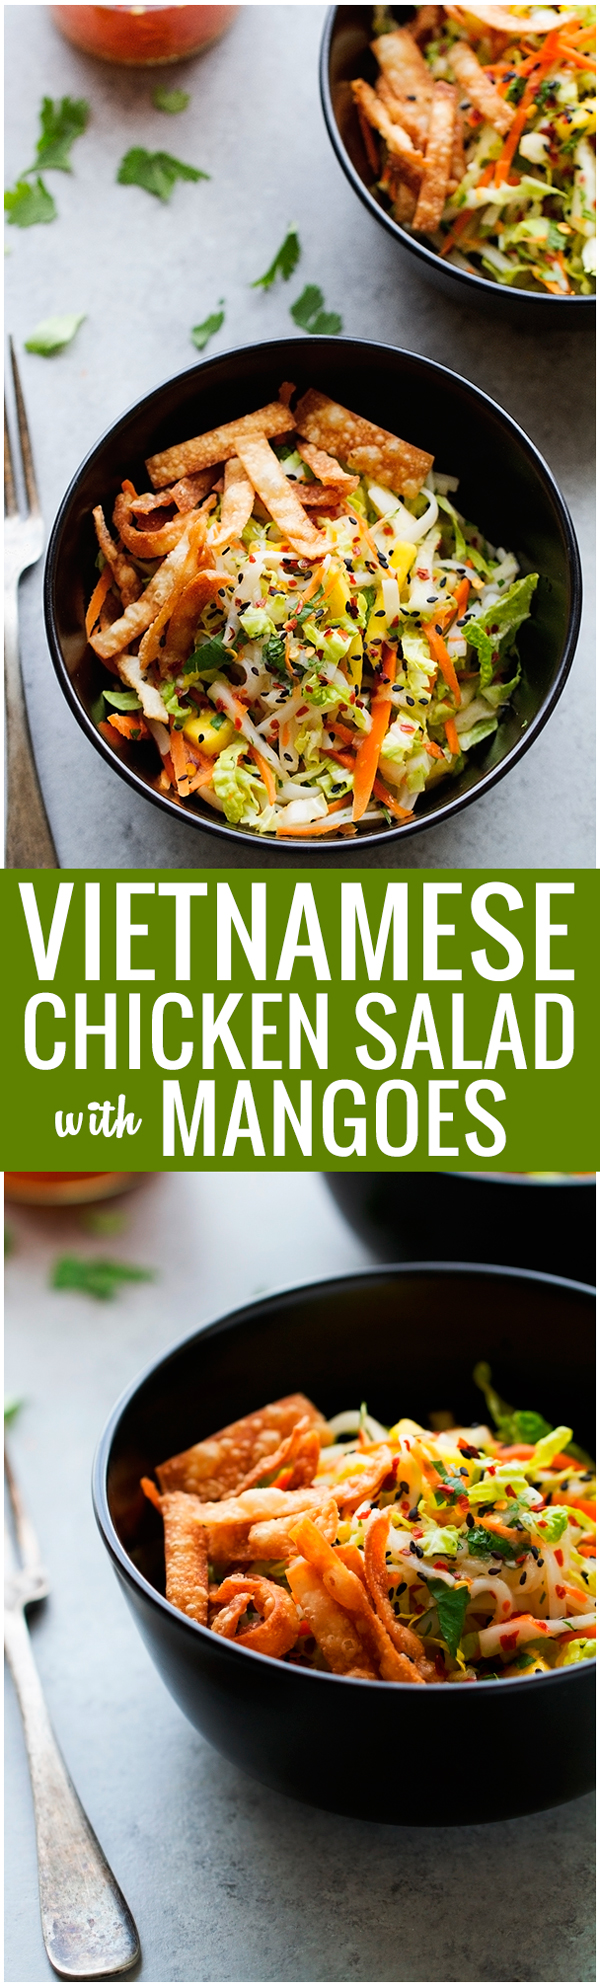 Vietnamese-Chicken-Salad-Vietnamese Chicken Salad with Mangoes - A super easy salad that is so delicious. Seriously the best! #chickensalad #vietnamesesalad #ricenoodlesalad | Littlespicejar.com